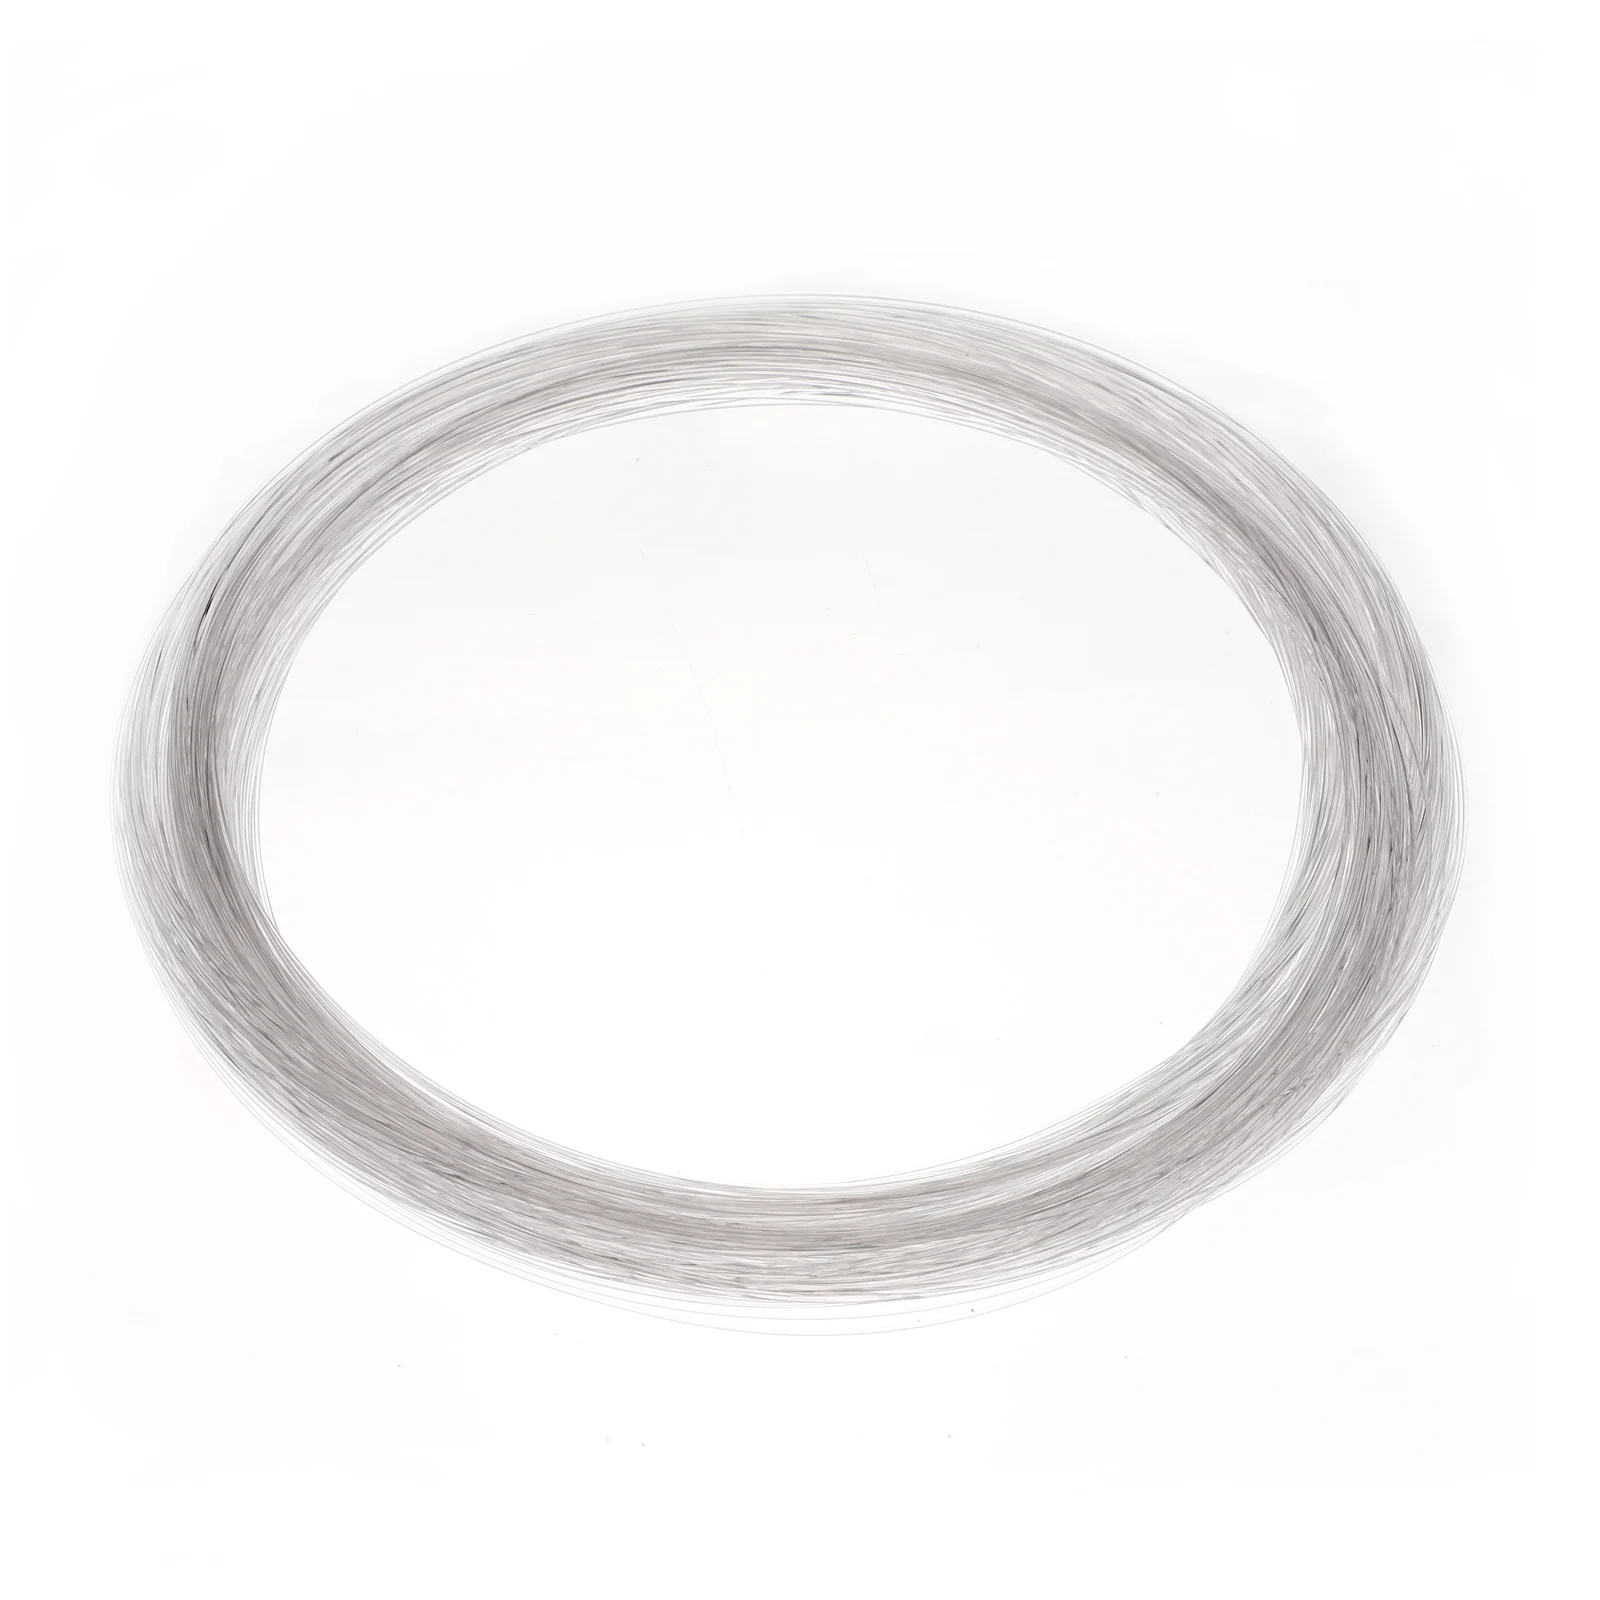 

OSALADI 075mm 100 Meters Long Optical Fiber PMMA Plastic Glow Cable for Star Sky Ceiling Light